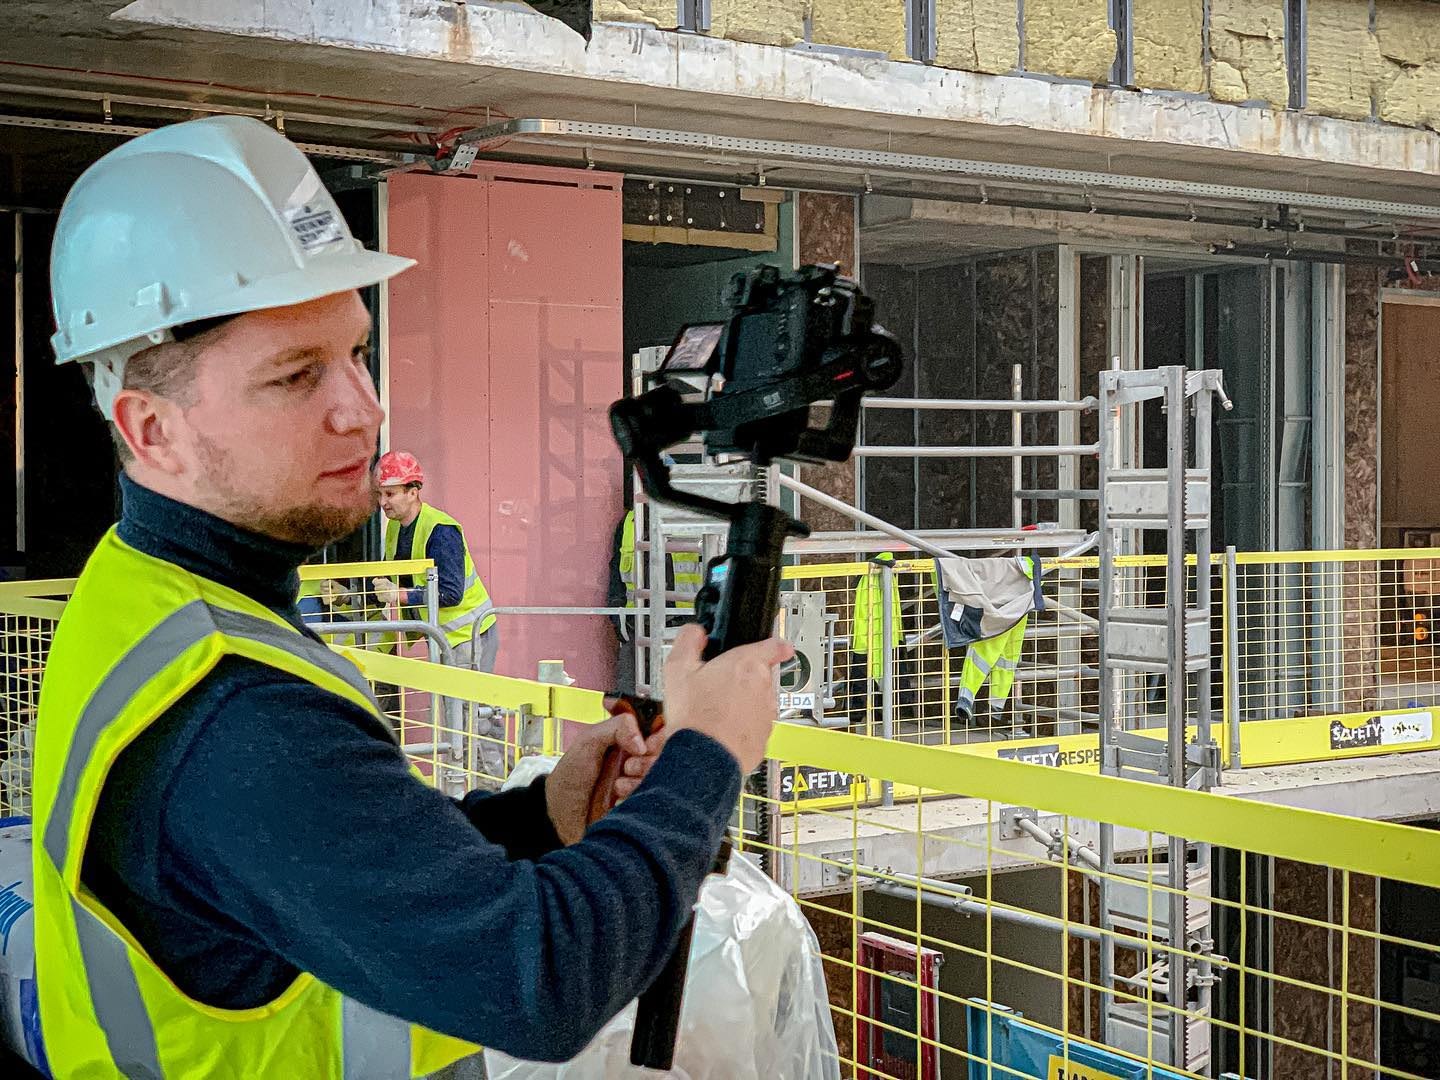 Day at the office 🚧 working hard, everyone did a good job 🏗 where next?
—
#constructionvideo #Videography #carpenter #FilmLocation #VideoMontage #WorkandTravel #AfterMovie #realestate #gh5 #VideoShot #iMovielt #AudioVisual #BusinessVideo #architecture #mozaair2